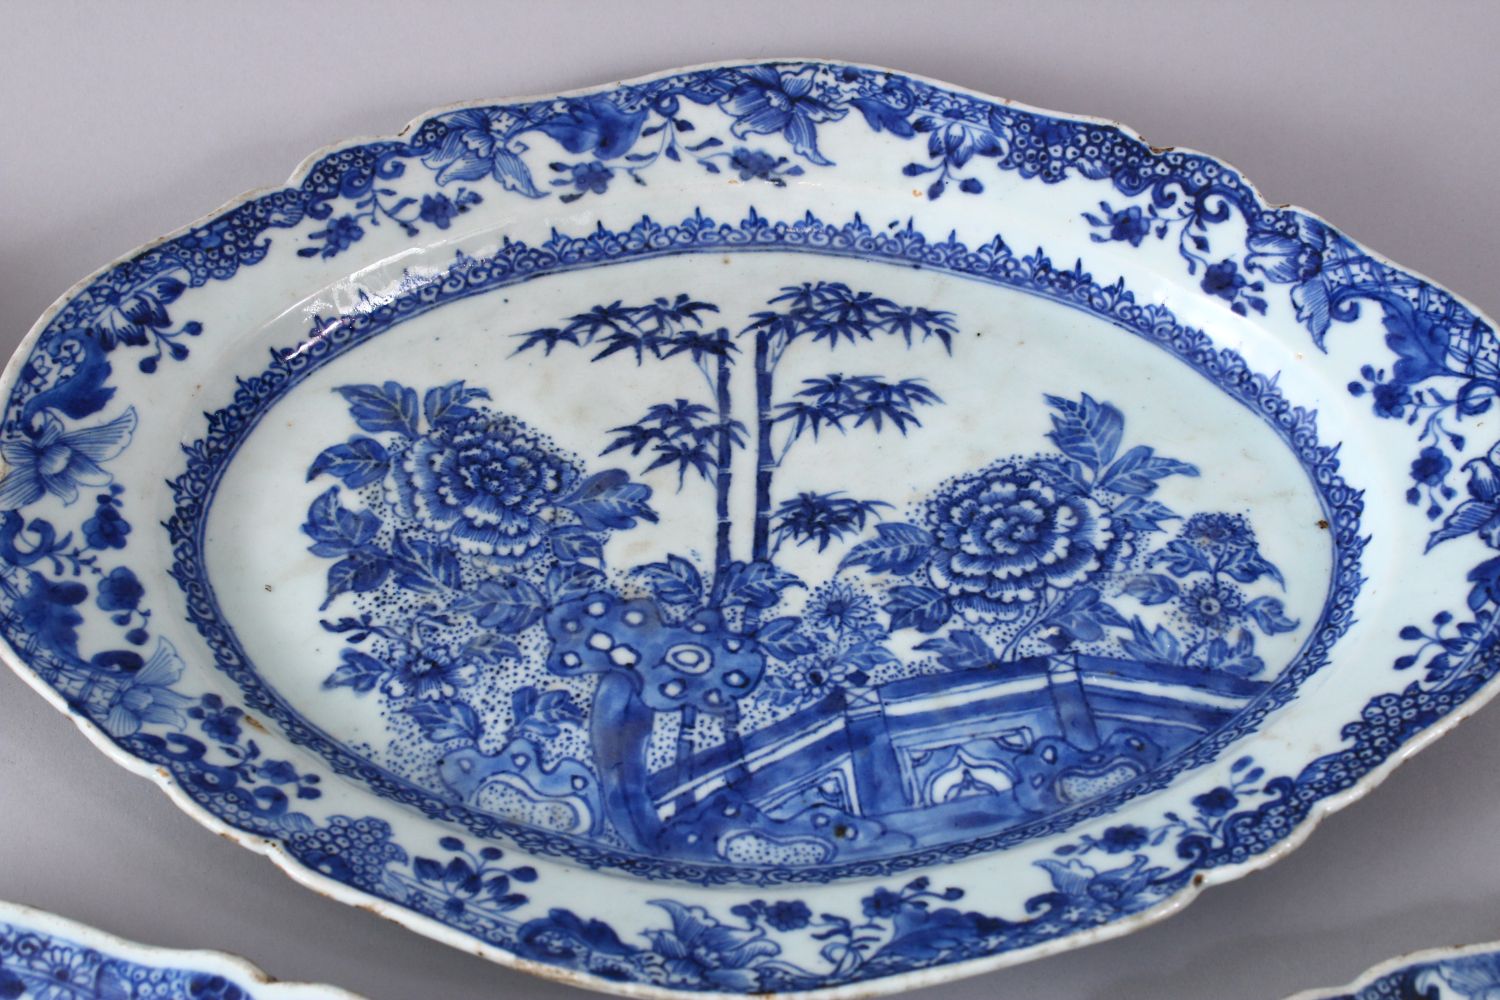 FIVE 18TH CENTURY CHINESE BLUE & WHITE PORCELAIN SERVING DISHES, each with a varying display of - Image 5 of 7